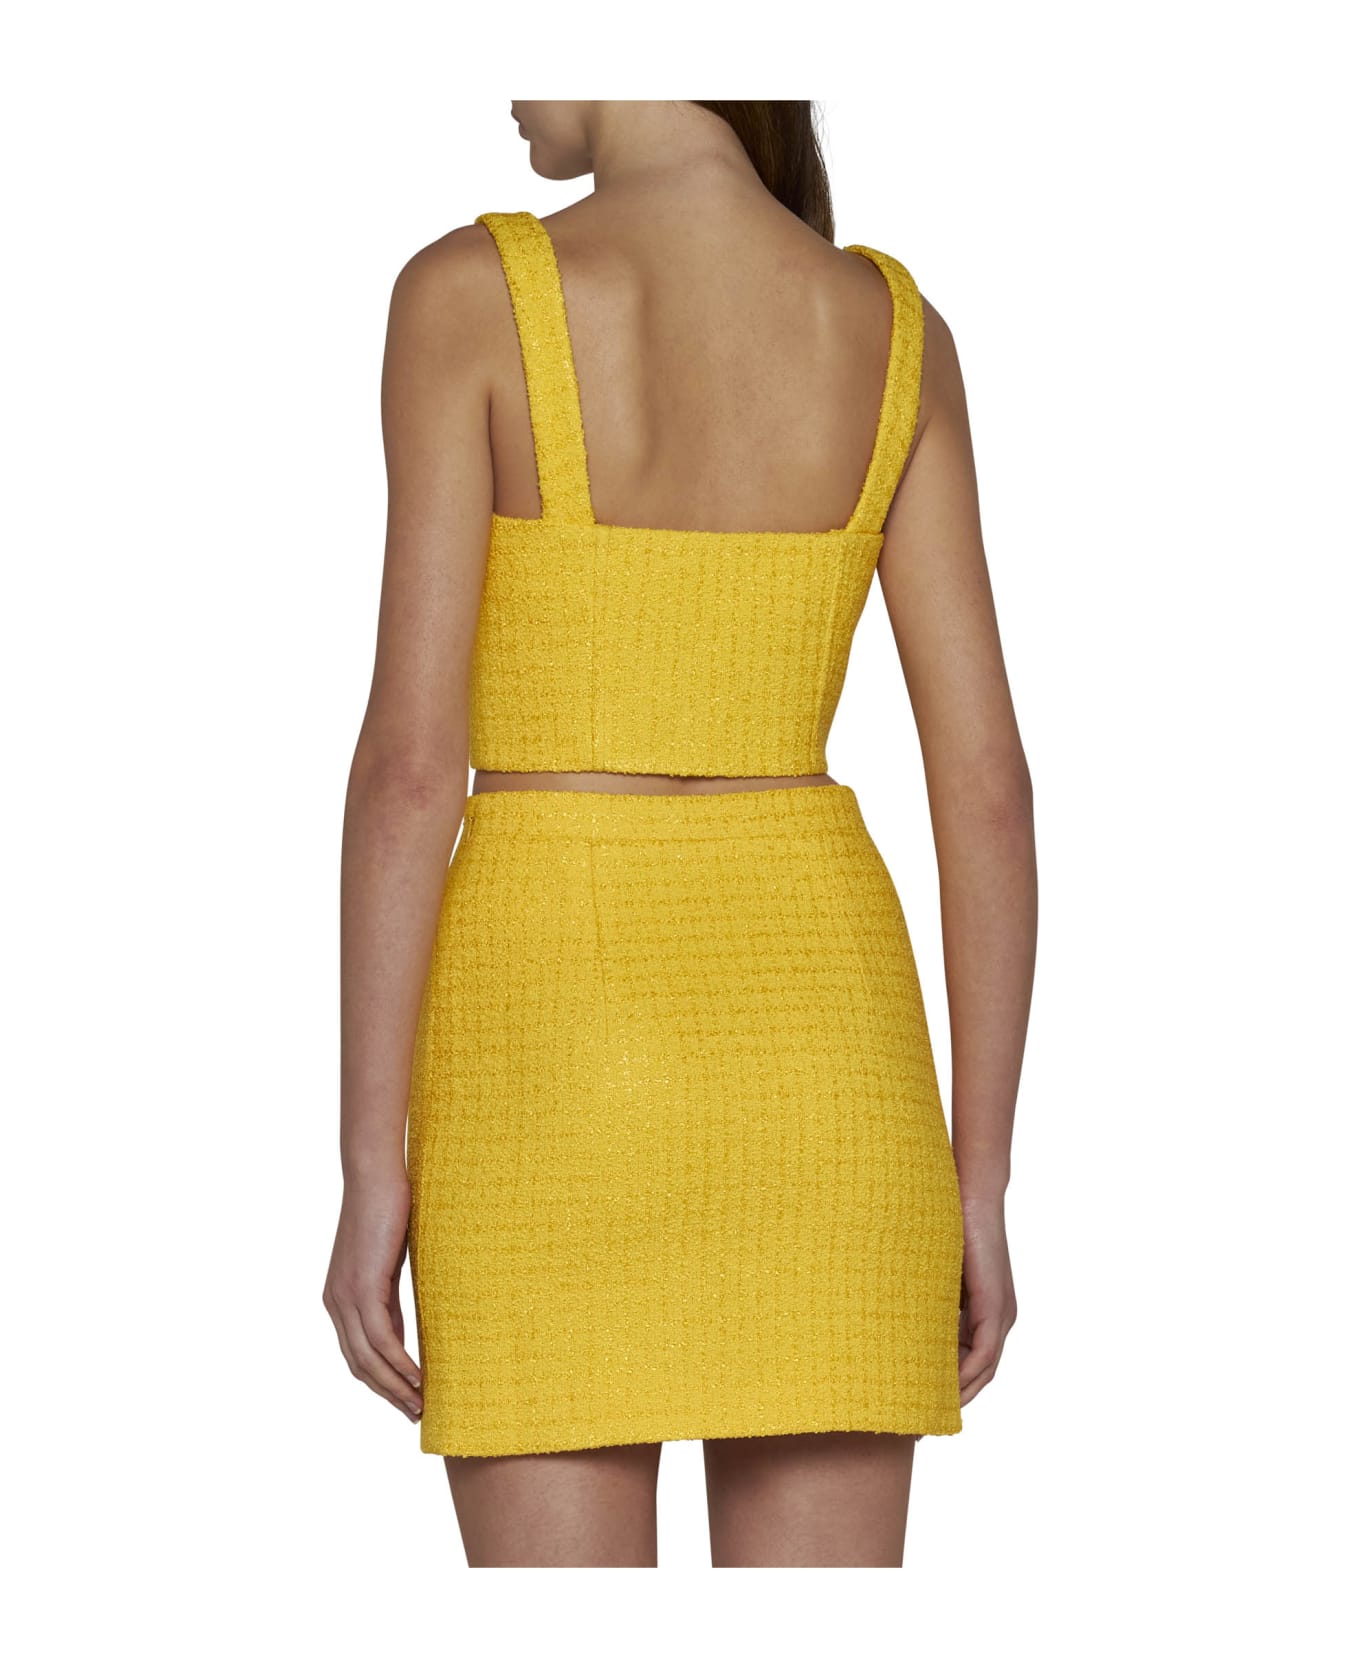 Alessandra Rich Top - Yellow